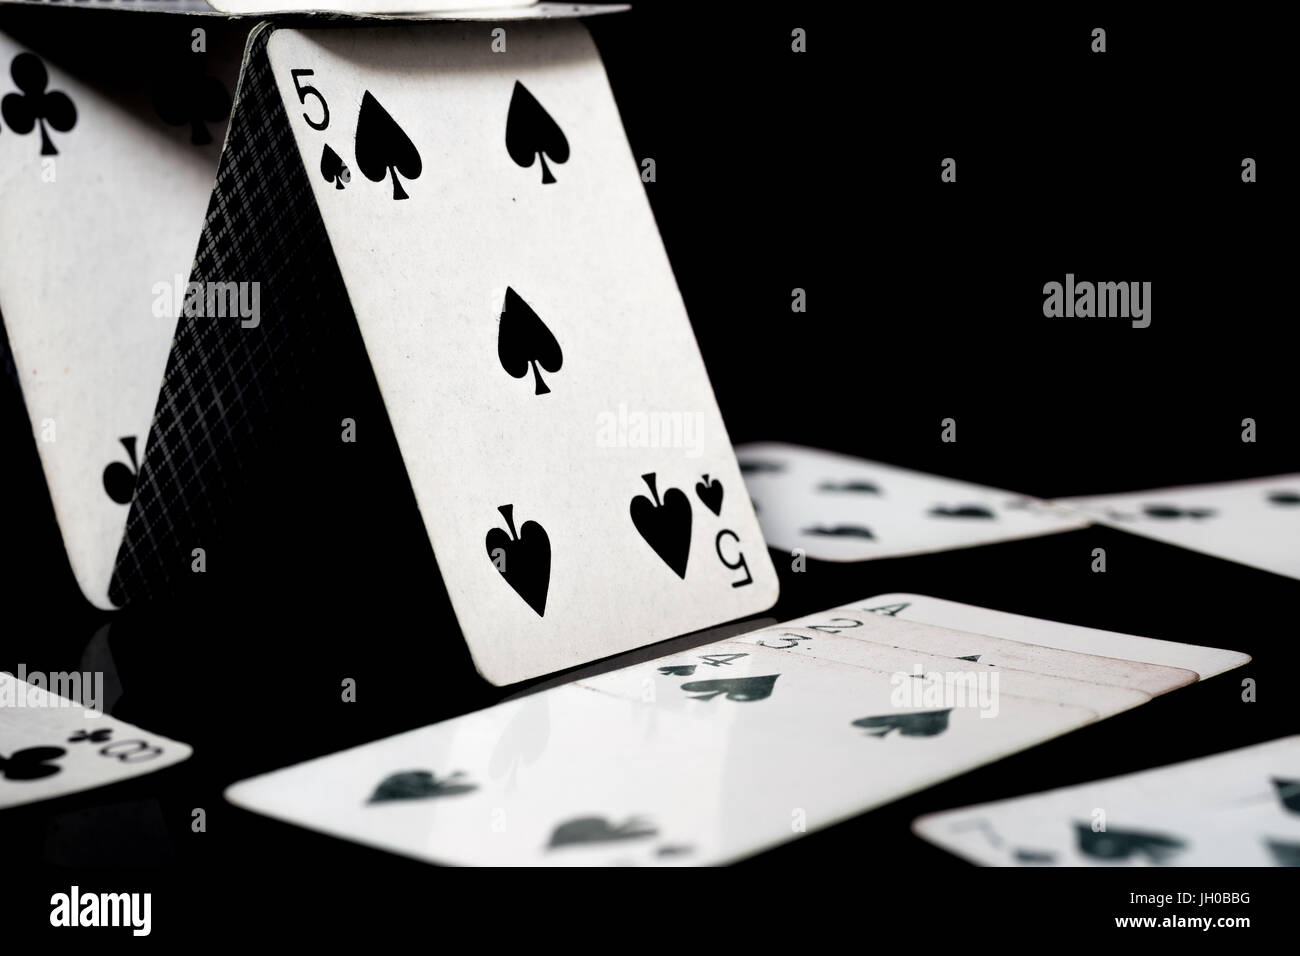 Playing cards forming a house of cards, and scattered white playing cards, black surface and background Stock Photo